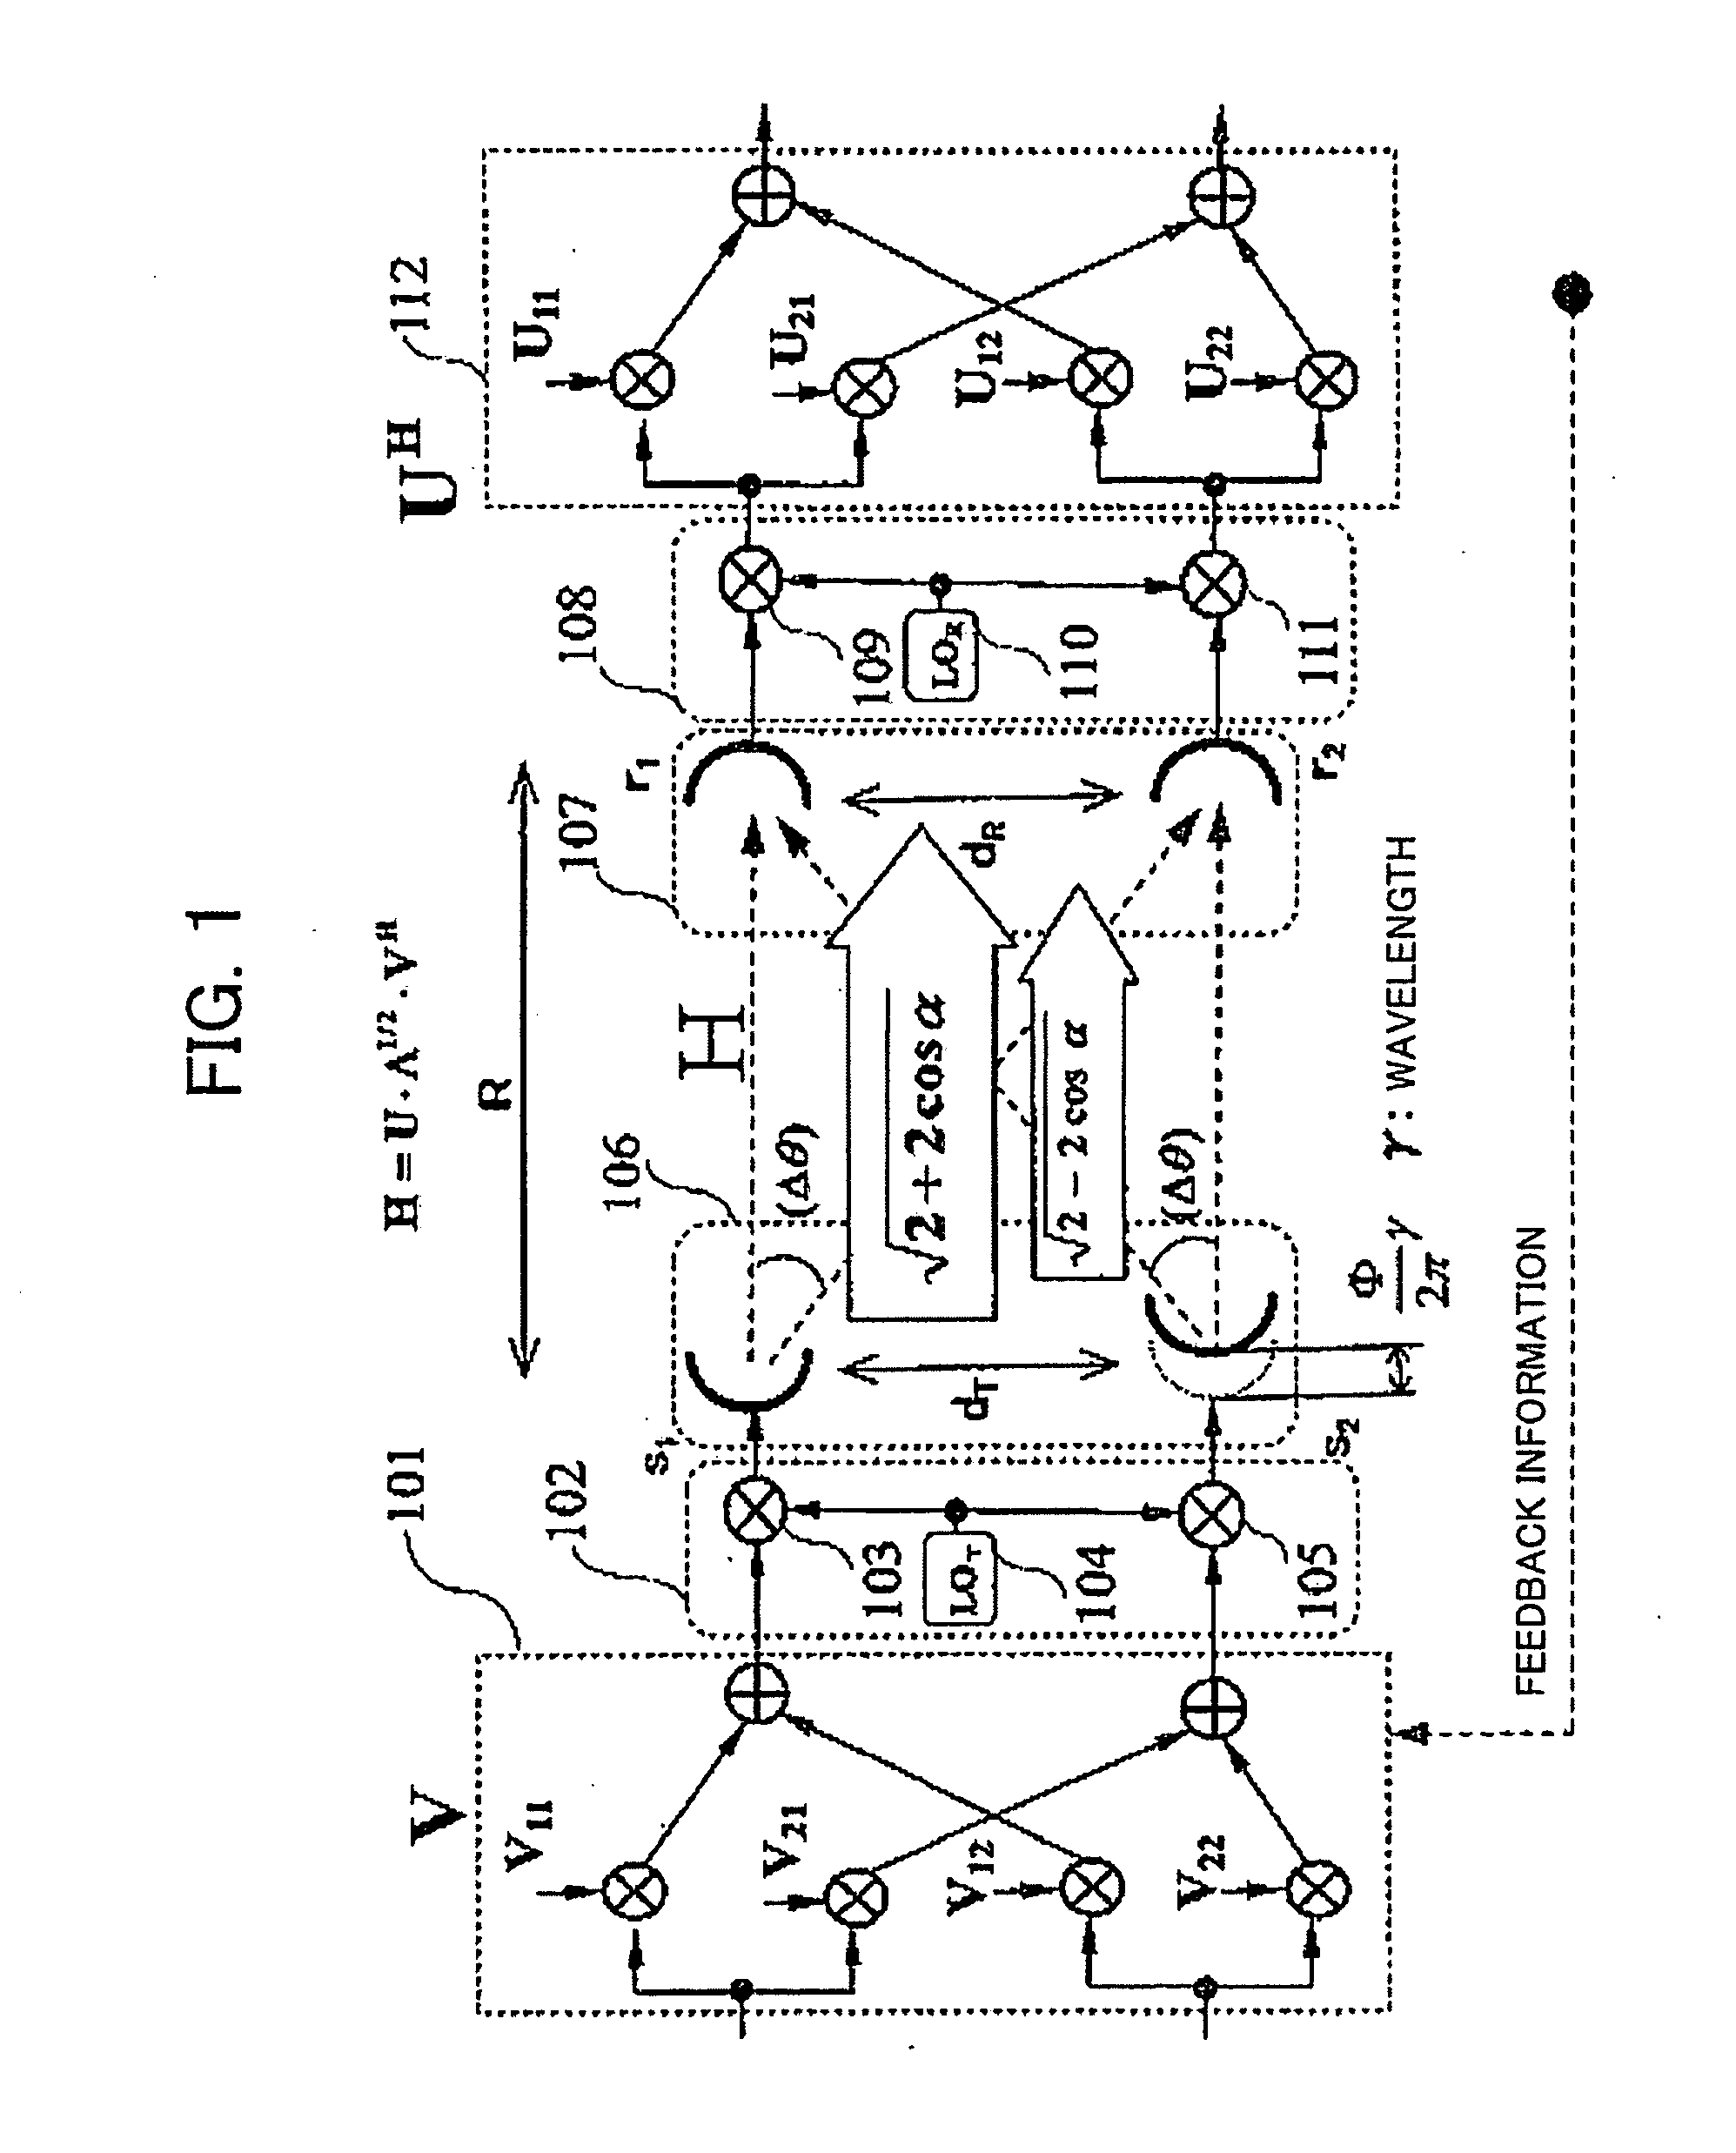 MIMO communication system having deterministic channels and method